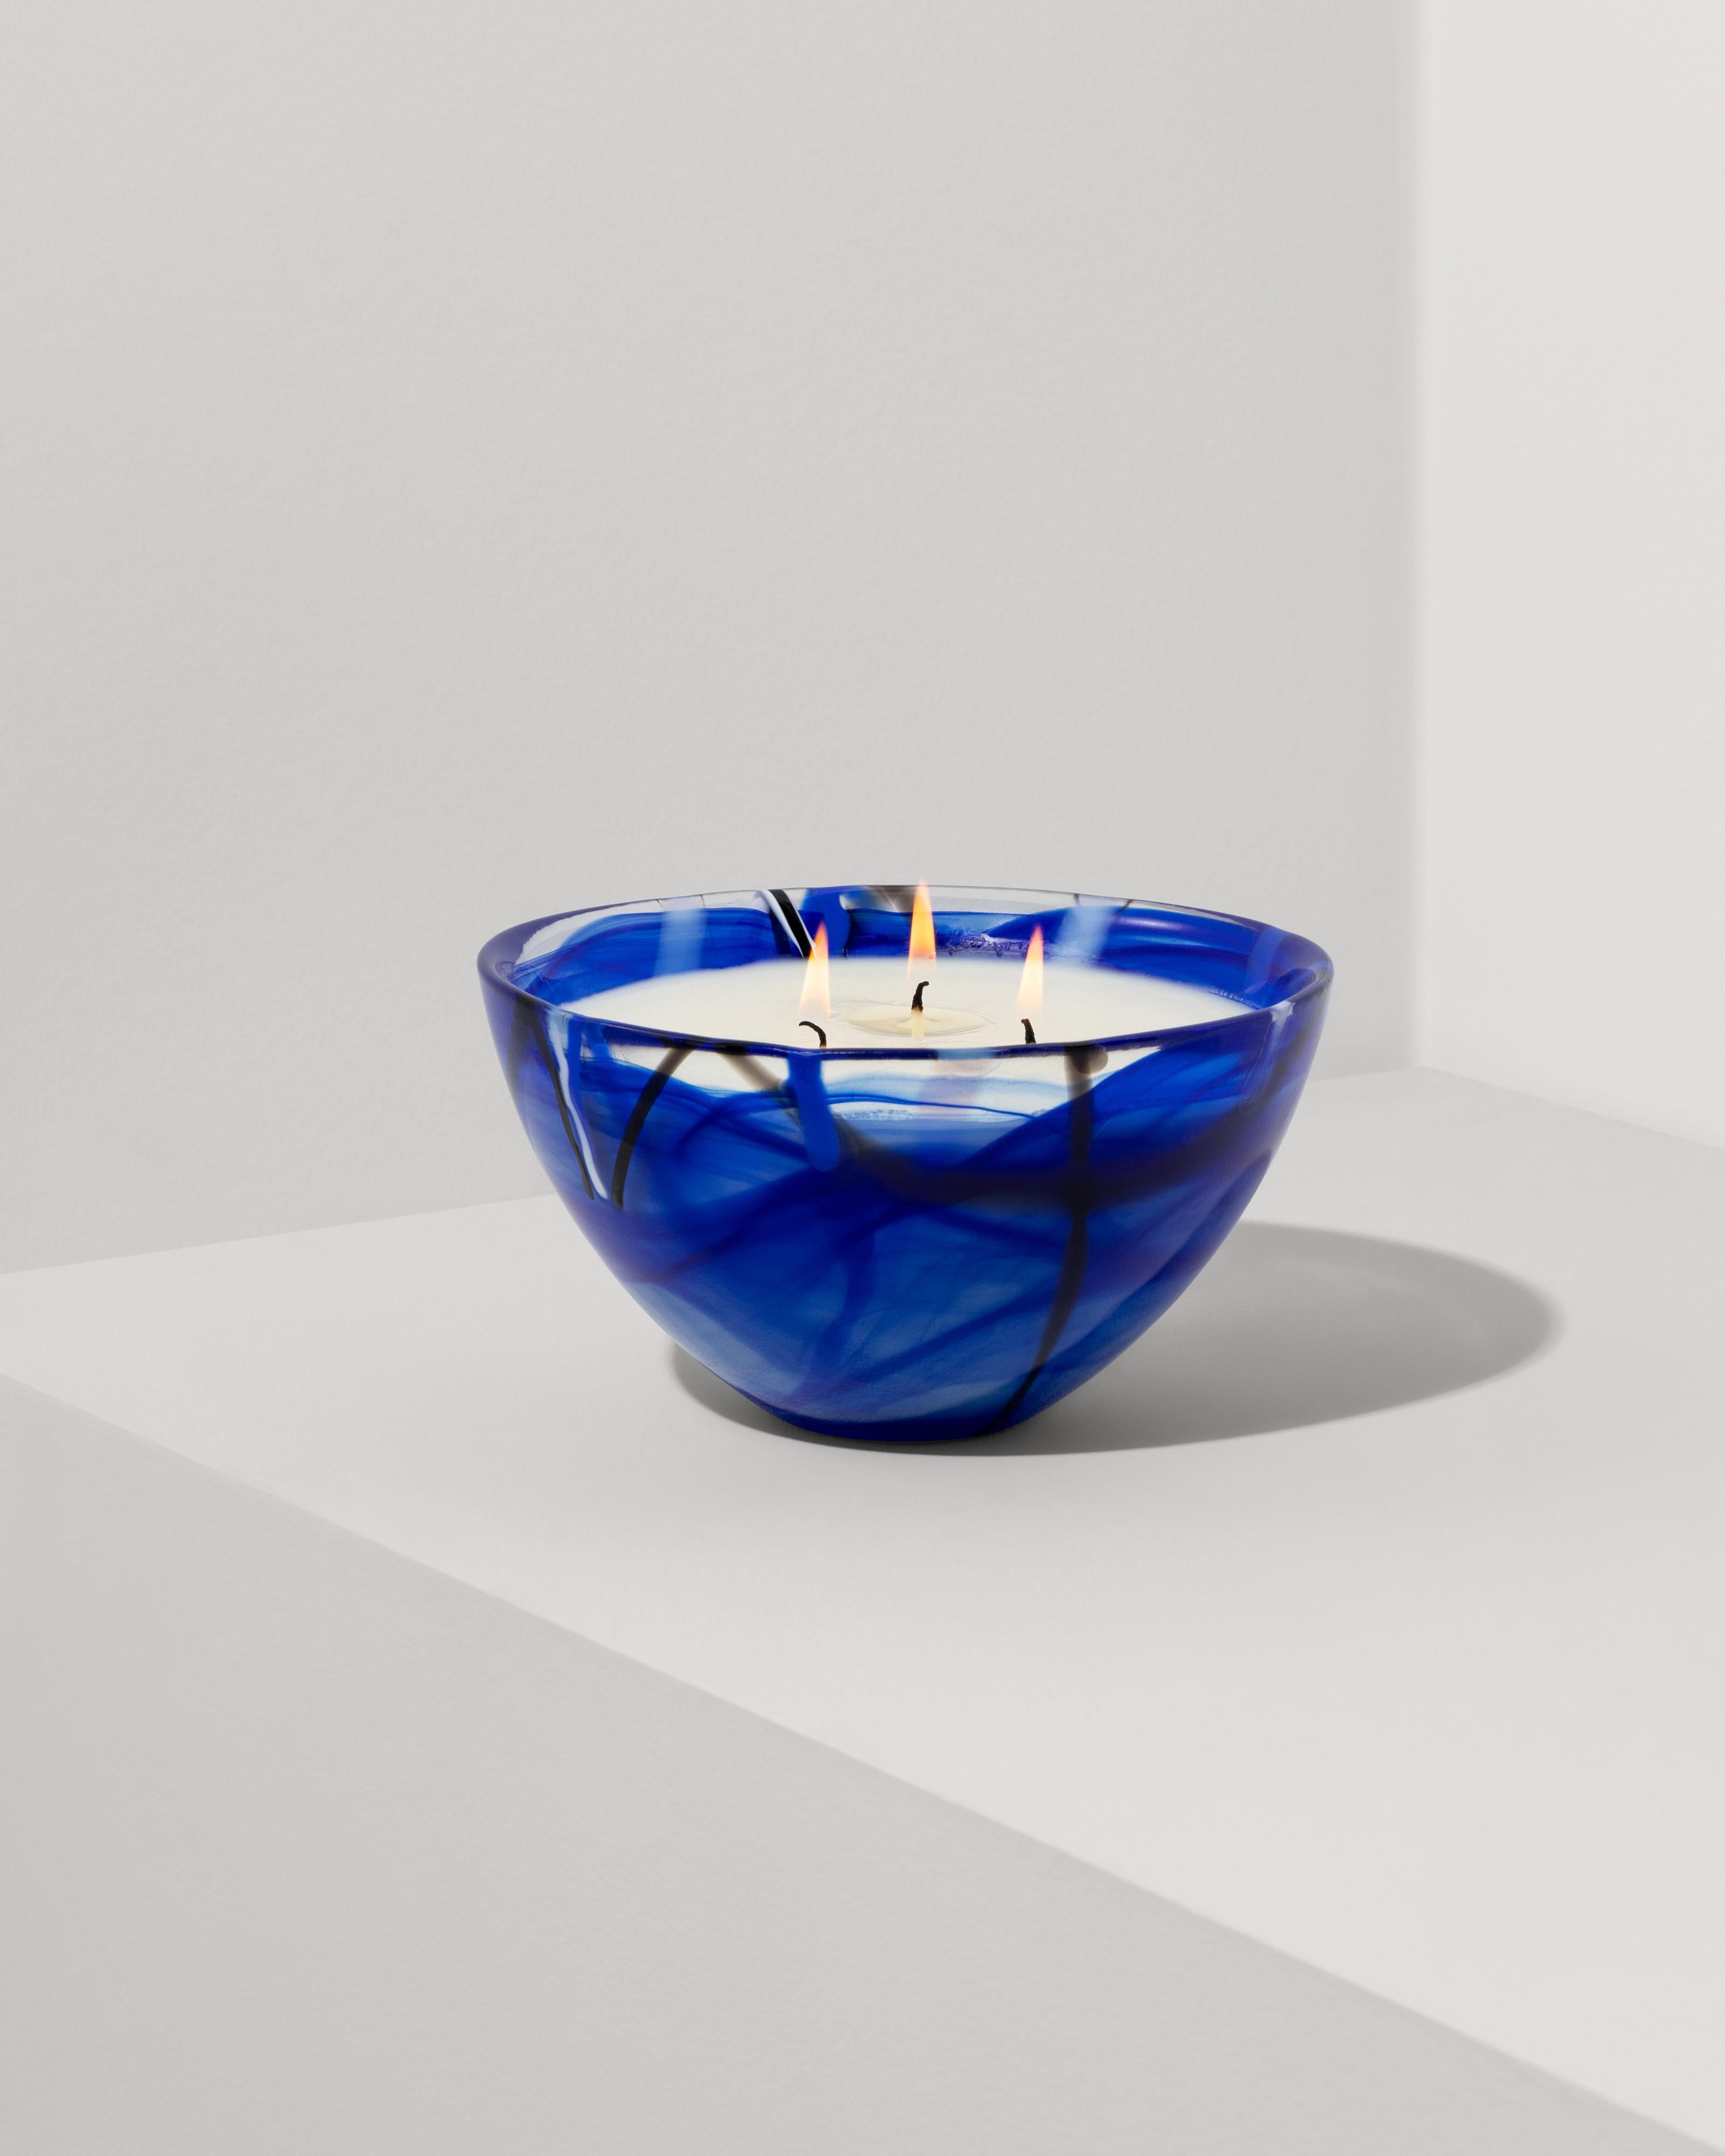 The Contrast candle in Coastal Bloom has notes of Sheer Lemon, Aromatic Rosemary, Red Currant, Fresh Jasmine, Raw Honey Nectar, Sea Salt Accord, Green Leafy Stems, Earthy Geranium, and White Amber.

The candle vessel is a blue Contrast bowl from